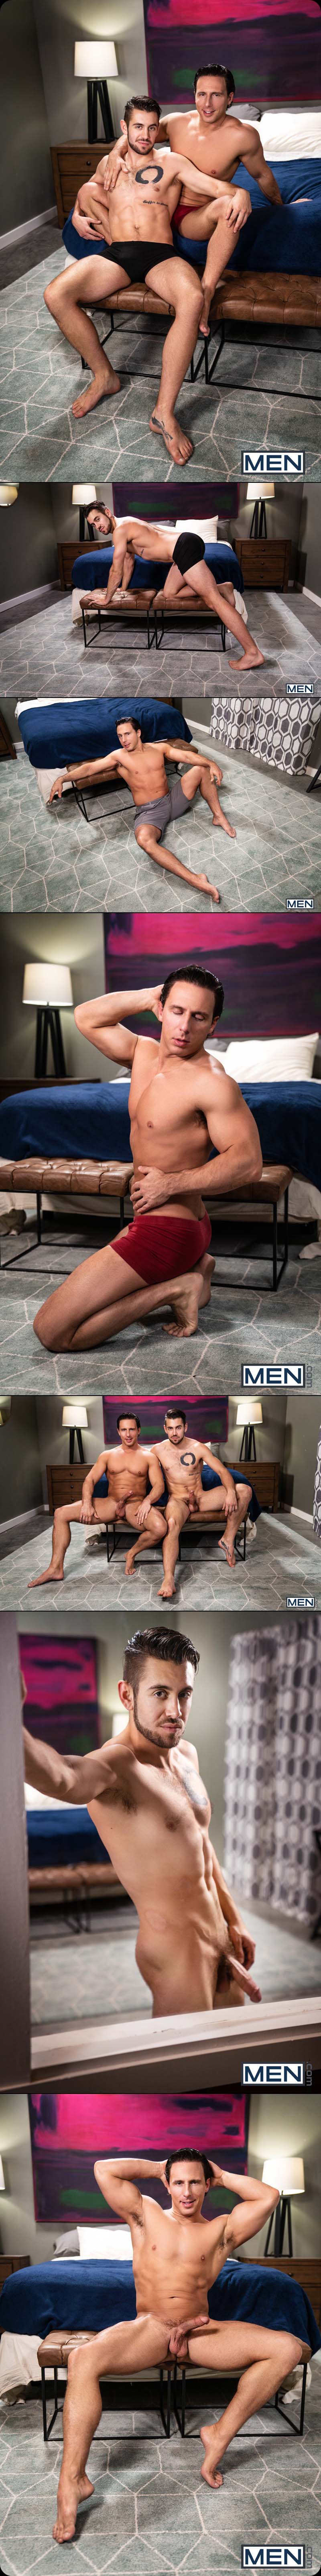 GAYBORS, Part Three (Reese Rideout Watches Neighbors Dante Colle and Ty Mitchell Fuck) at MEN